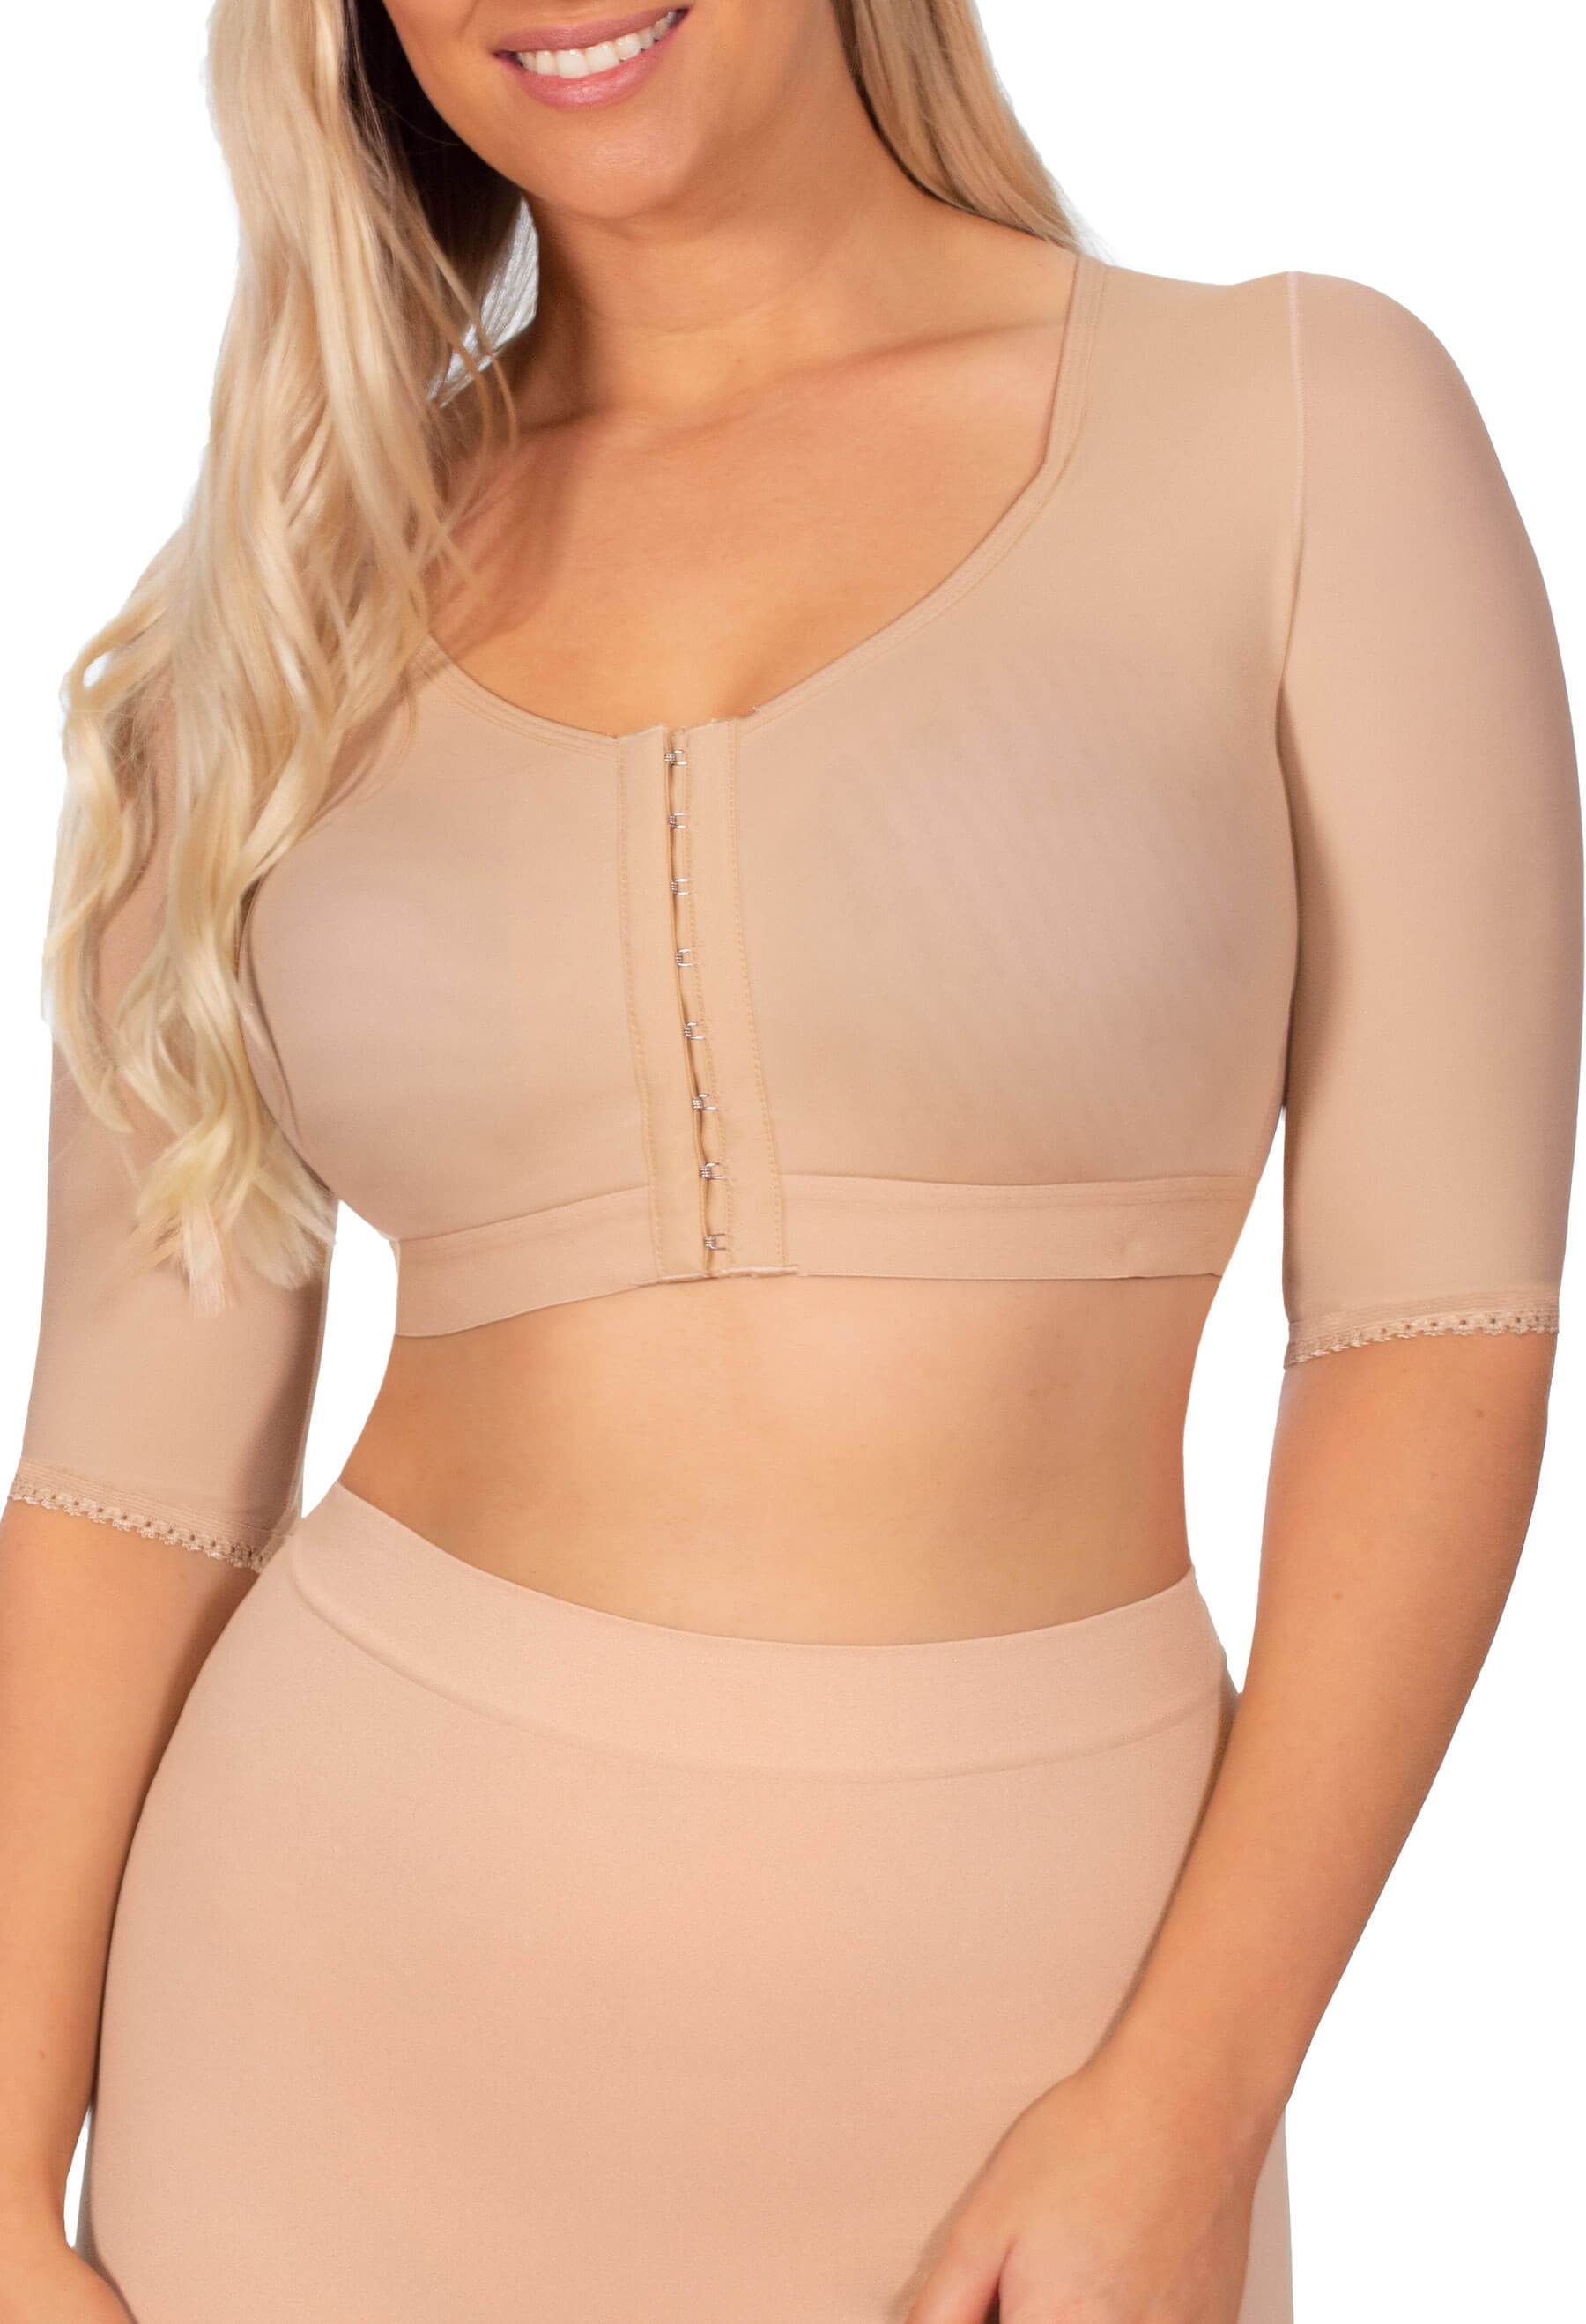 Find Cheap, Fashionable and Slimming long sleeve arms shaper